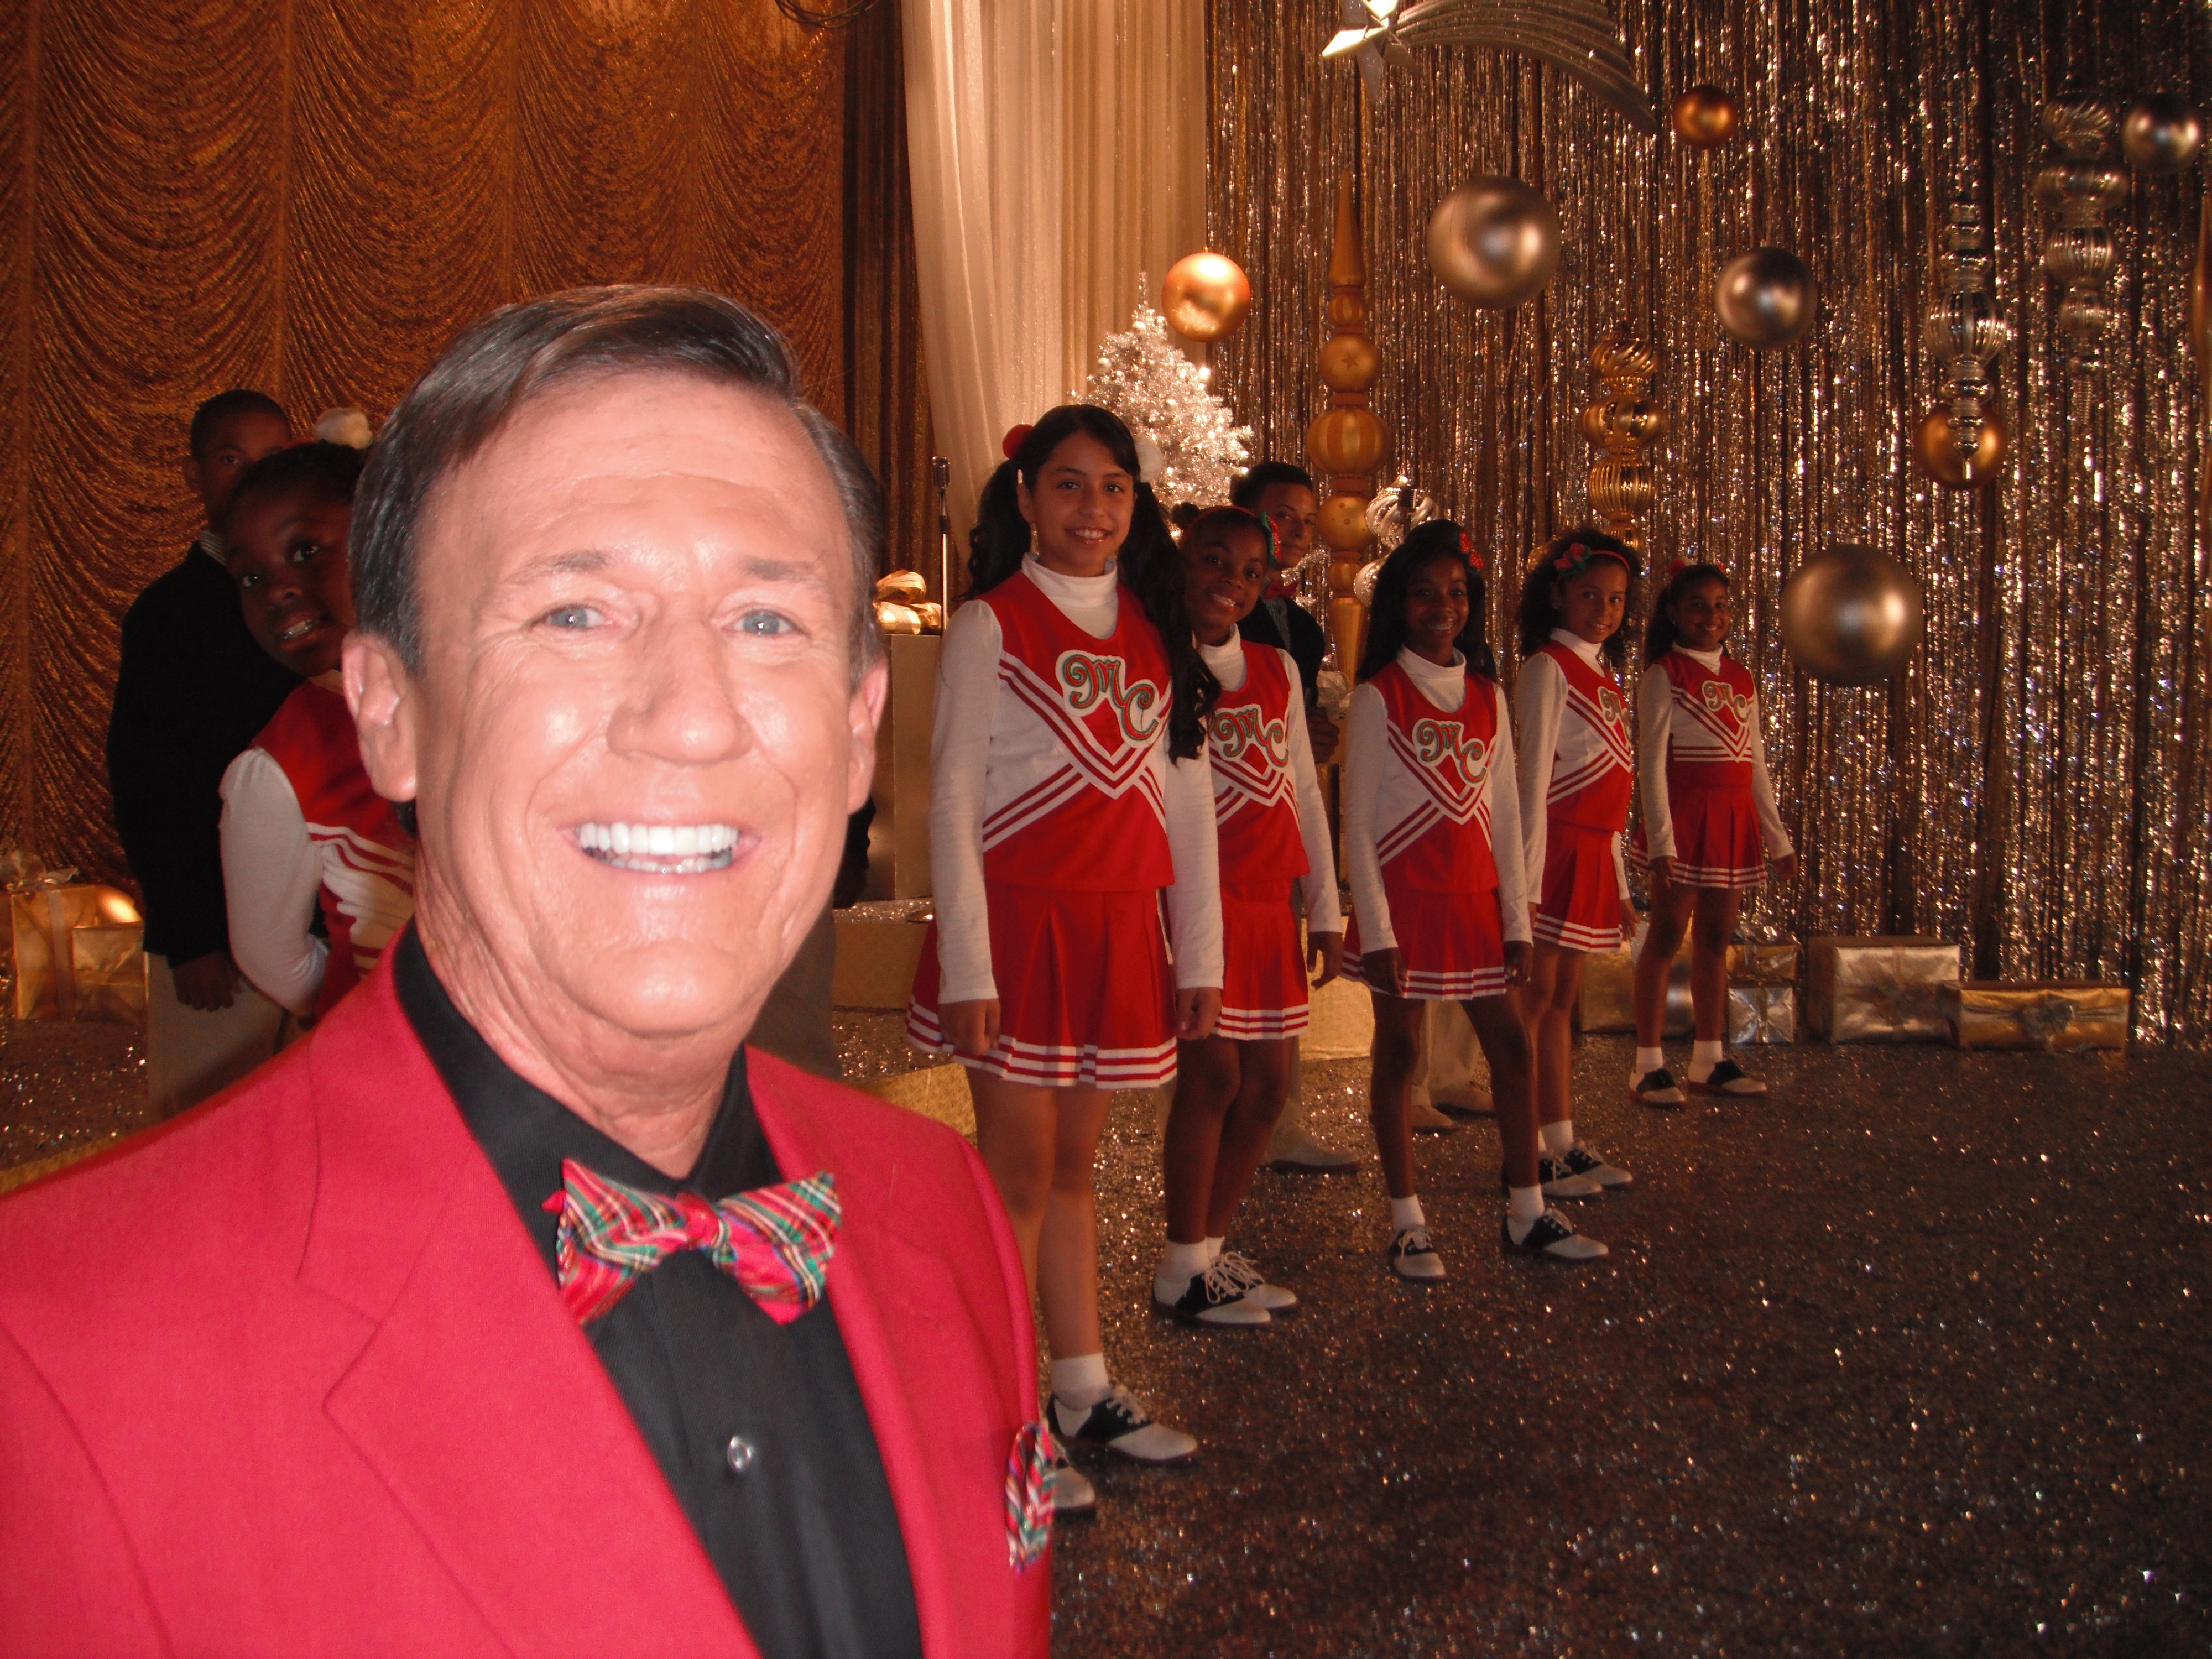 Playing Dick Clark hosting the Maria Carey Christmas special music video OH SANTA!